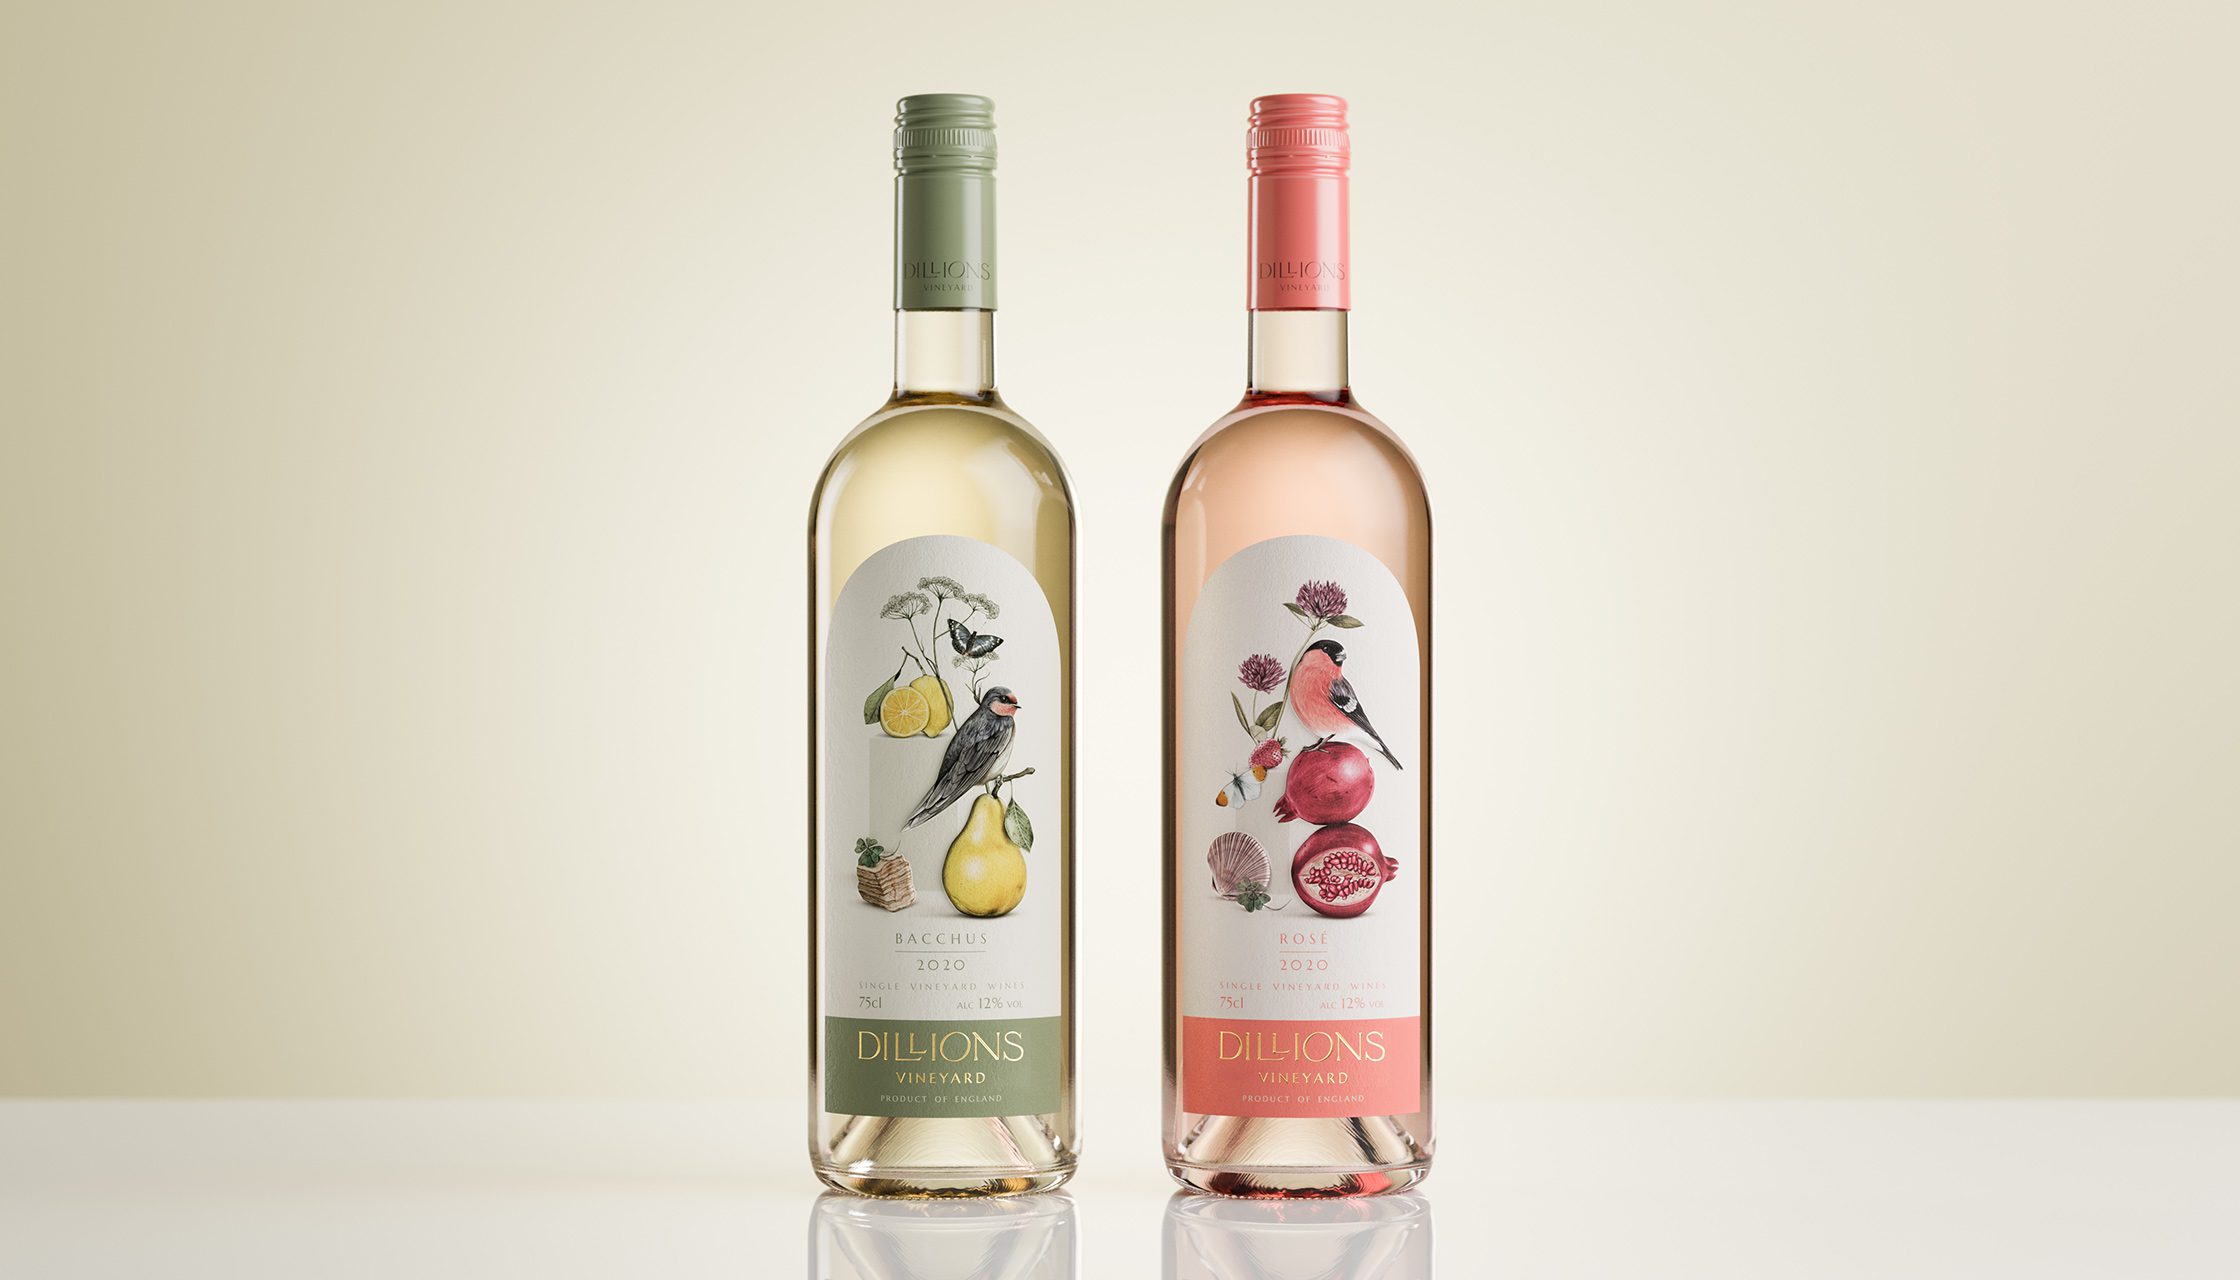 Dillion's rose and white wine labels